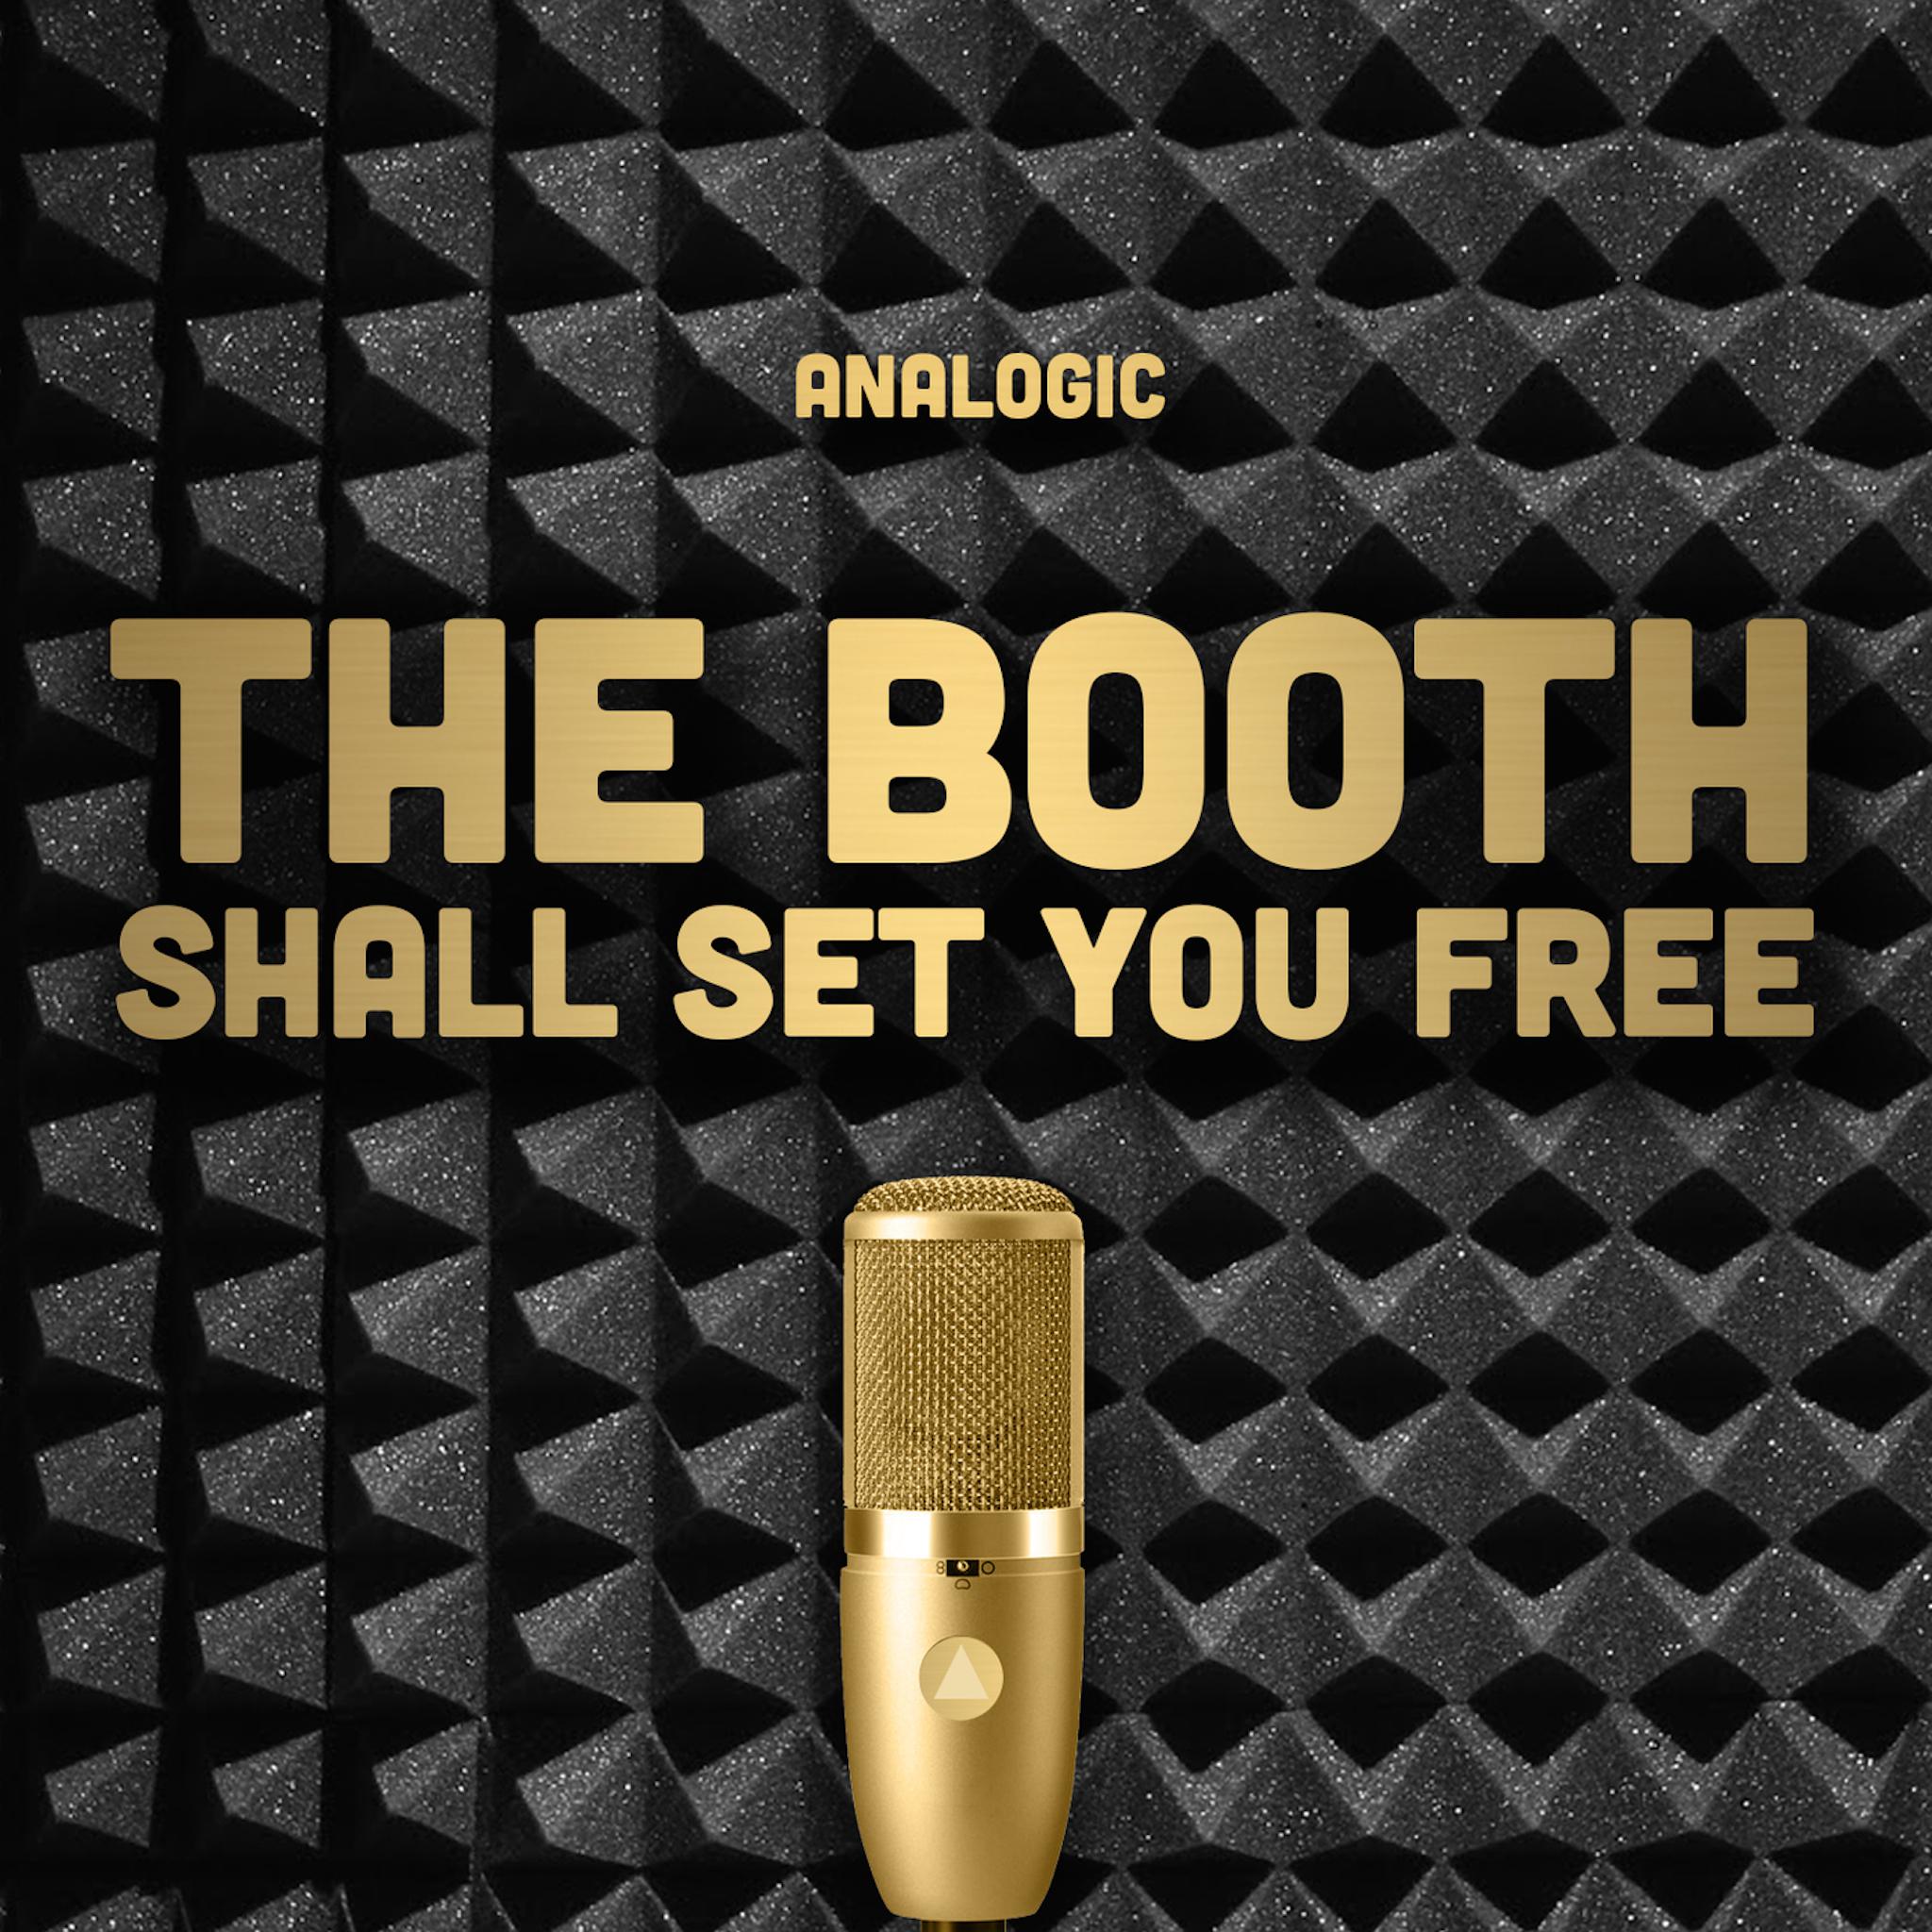 The Booth Shall Set You Free